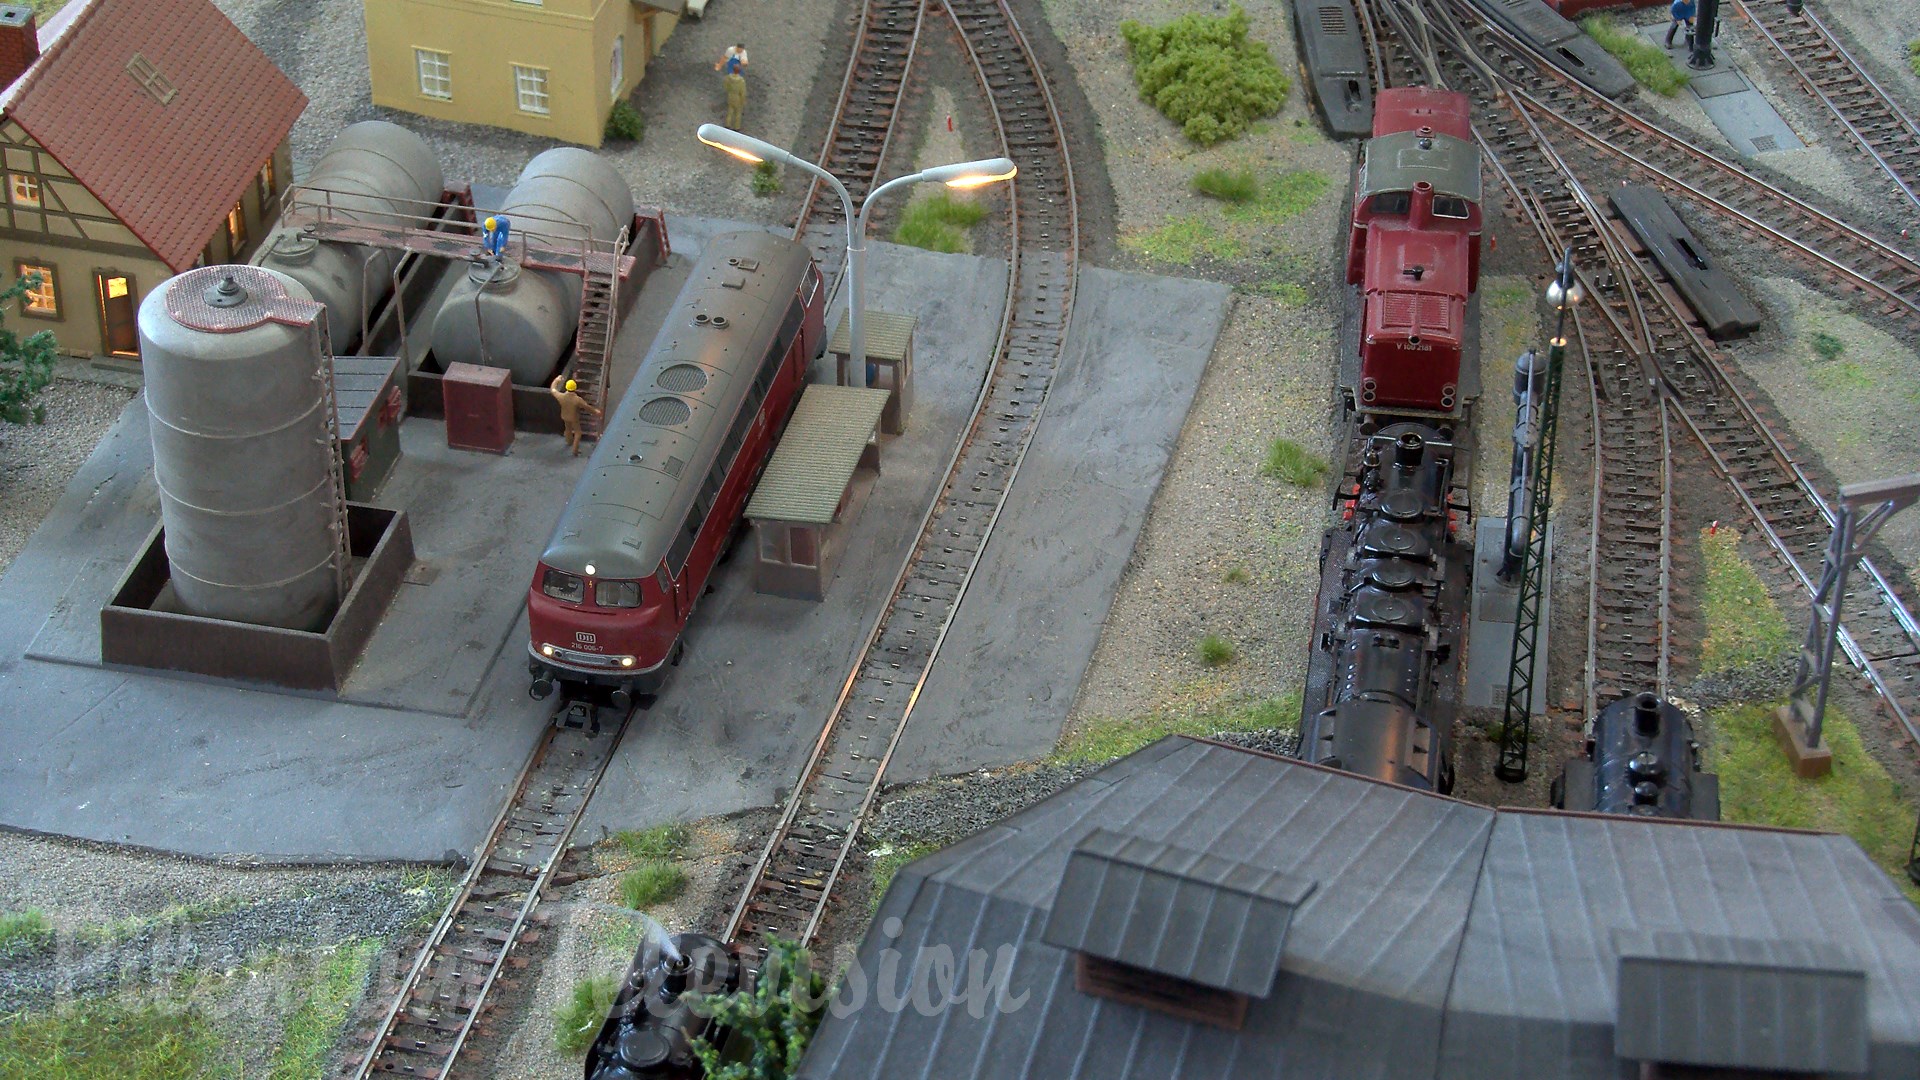 Model Railway Operations at the Steam Locomotive Engine Shed - Smoky Model Trains in HO Scale